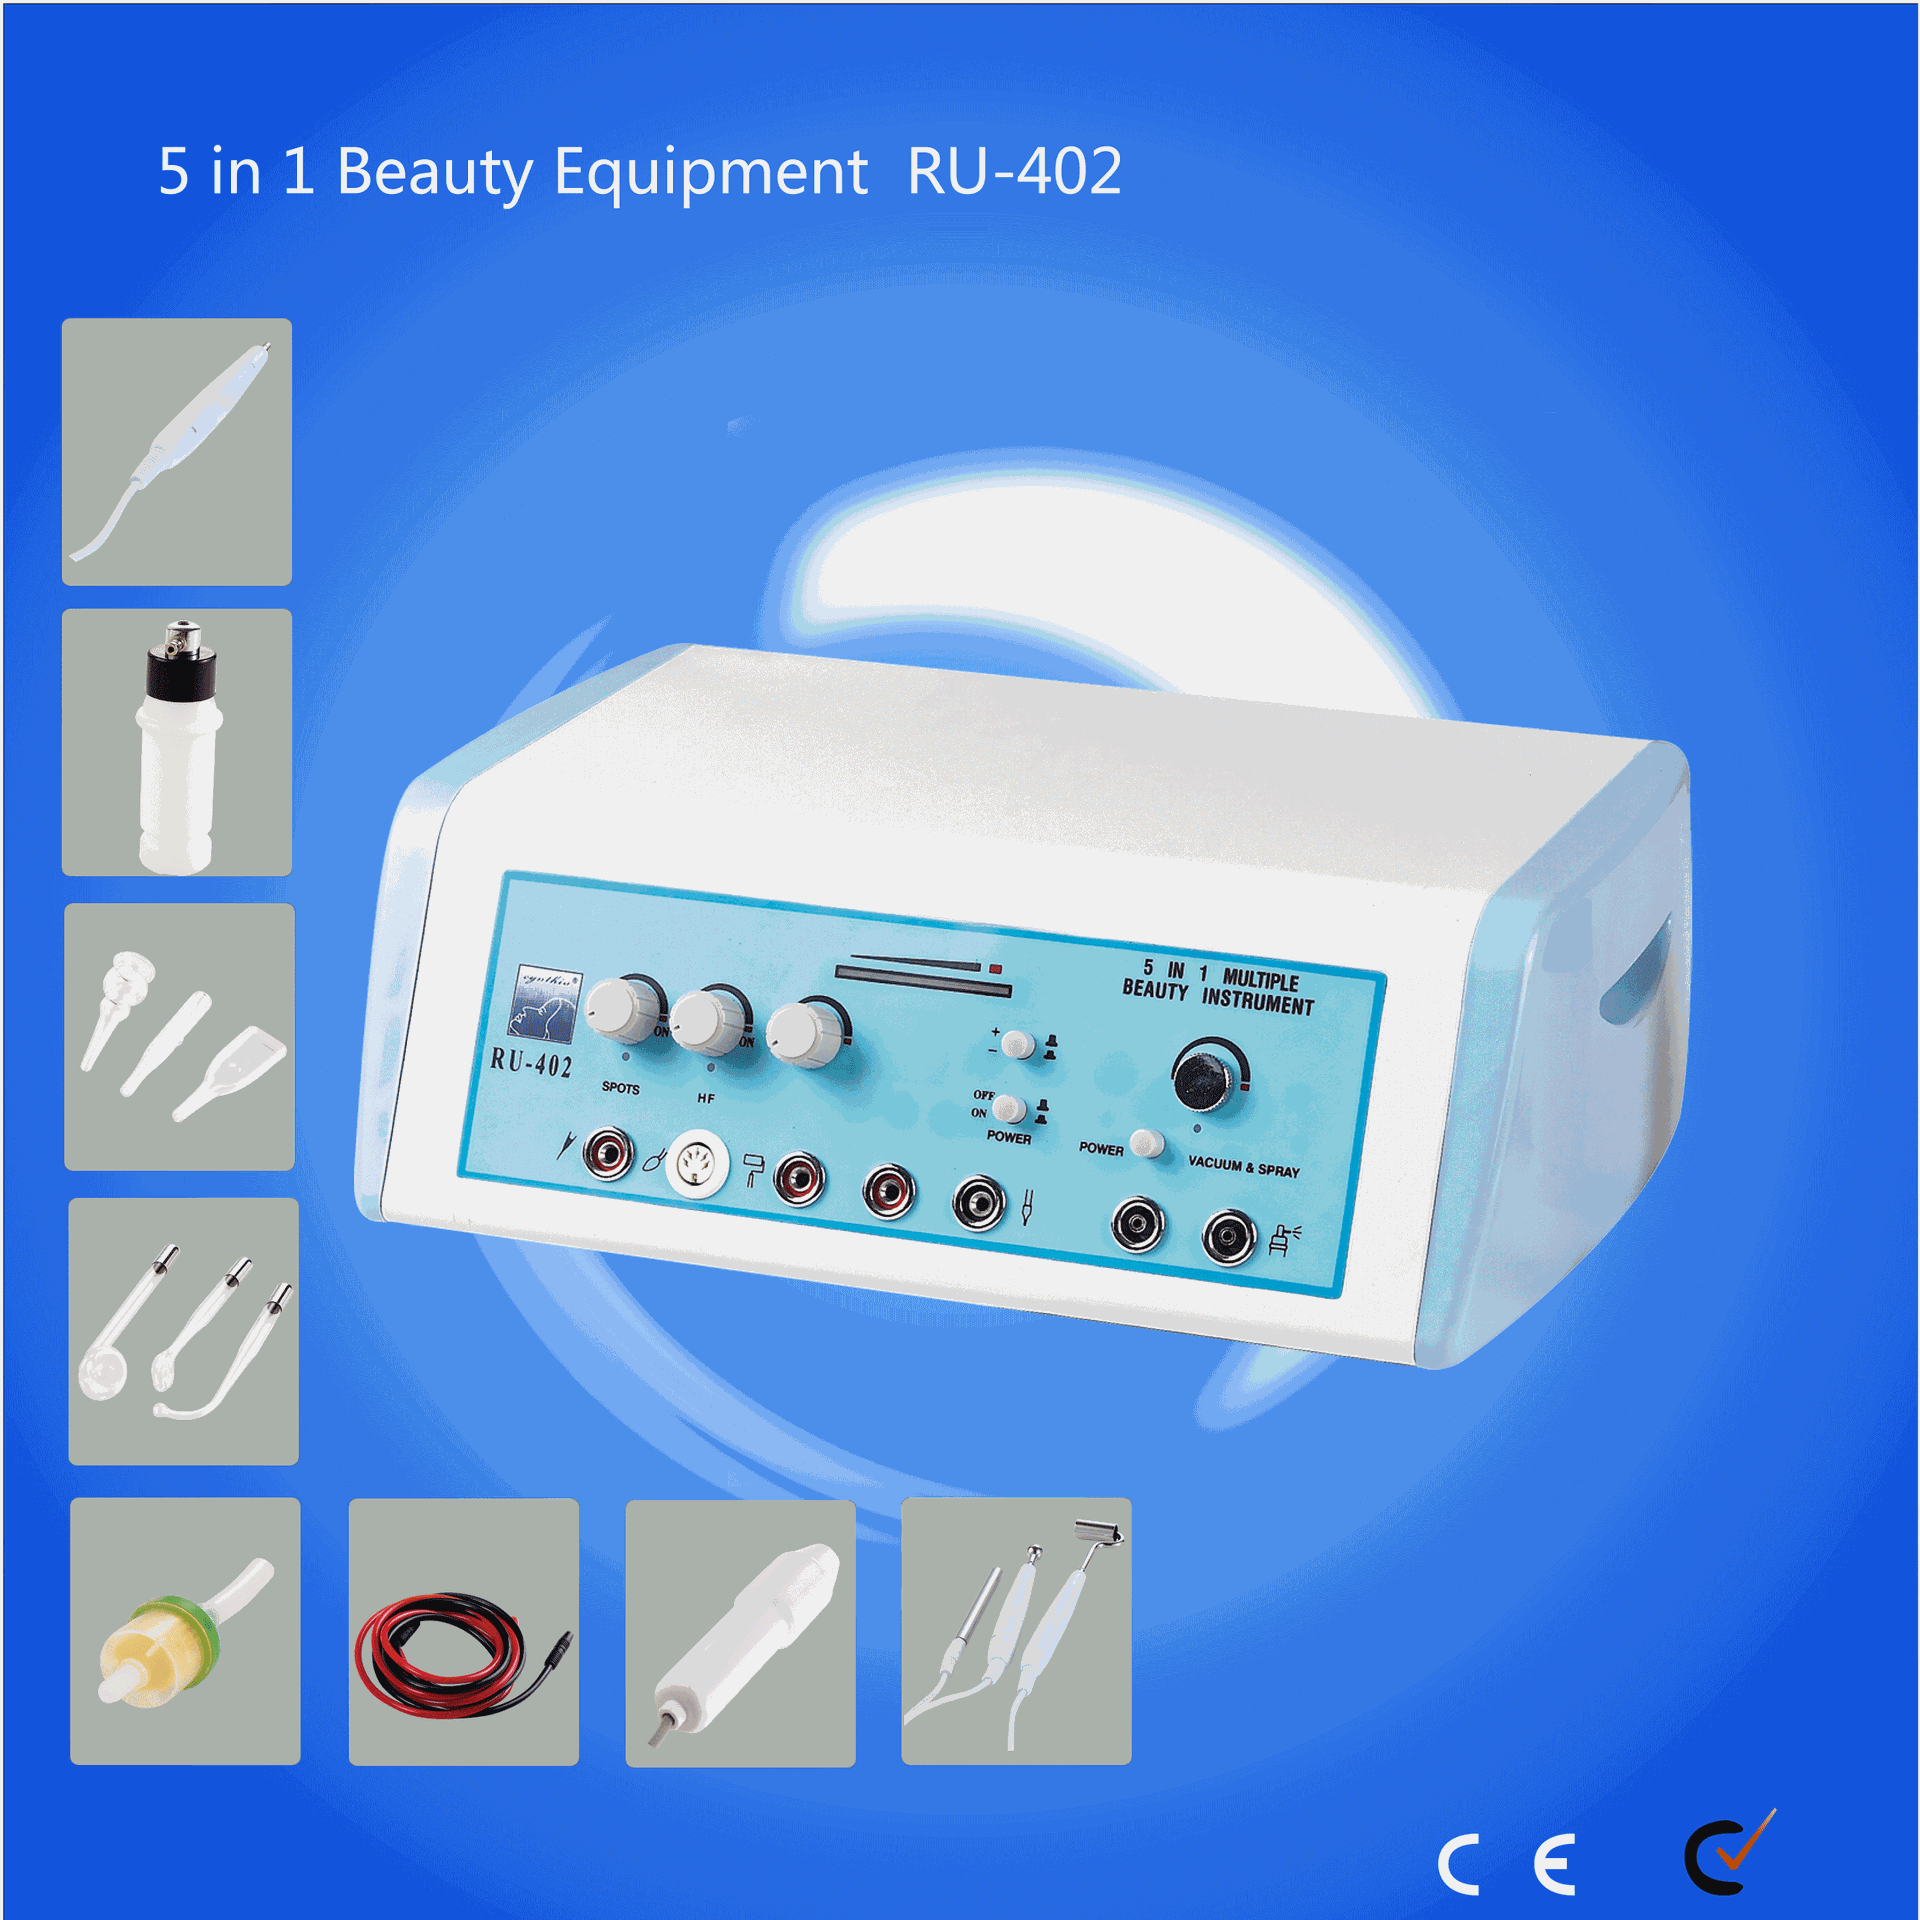 RU-402 facial machine high frequency ozone machine Galvanic probes High frequency handles Spot removal handle Vacuum glasses 5 in 1 equipme